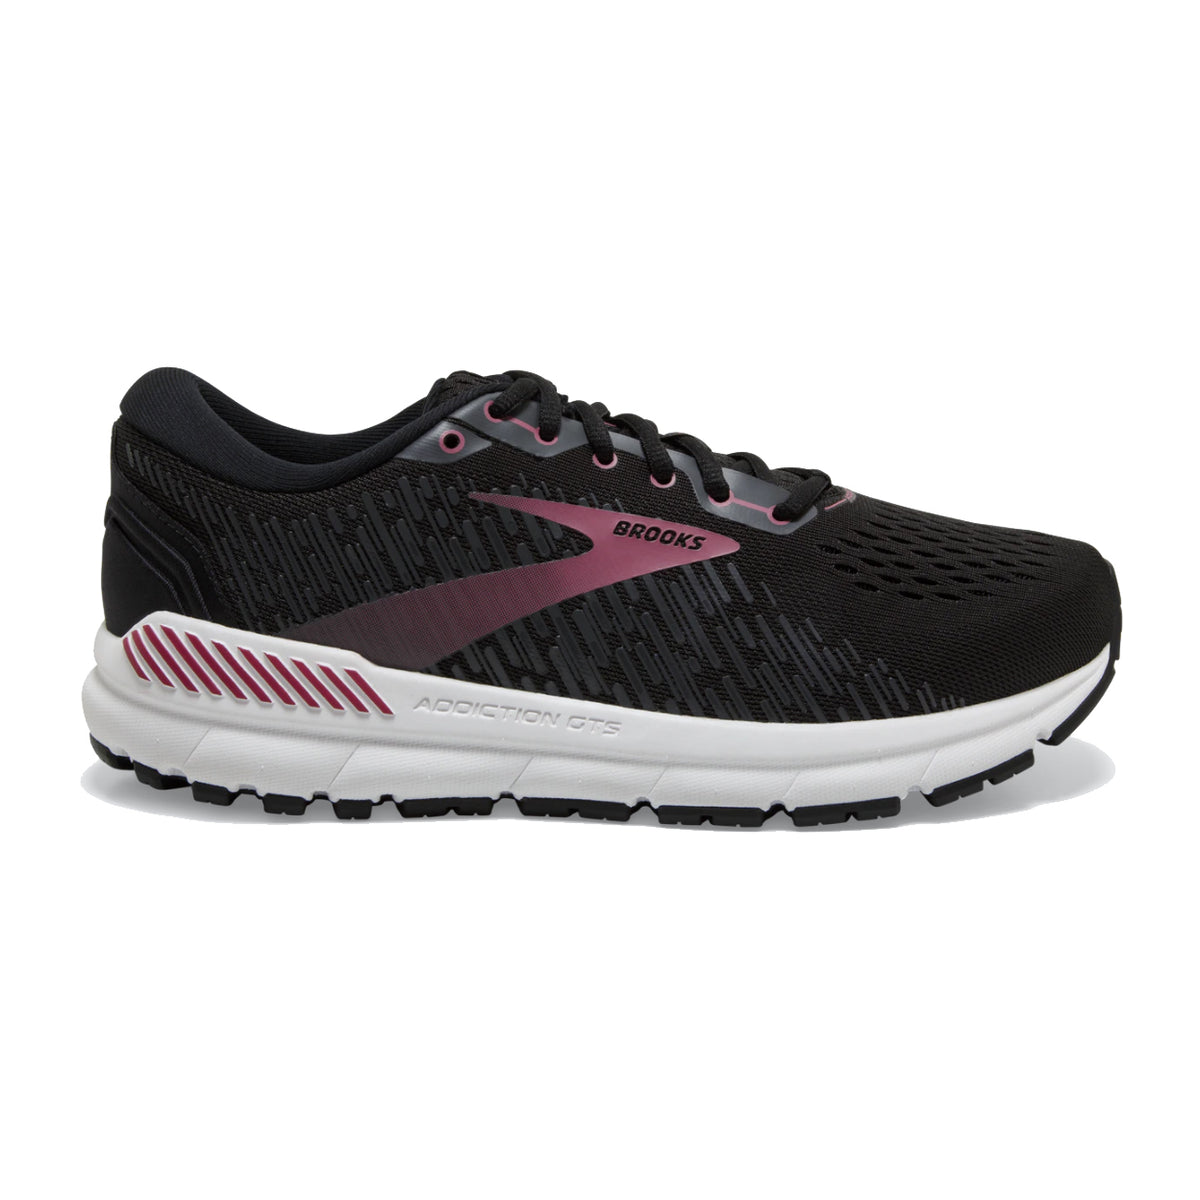 A single Brooks Addiction GTS 15 women&#39;s running shoe with black upper and white sole, designed for severe overpronators.